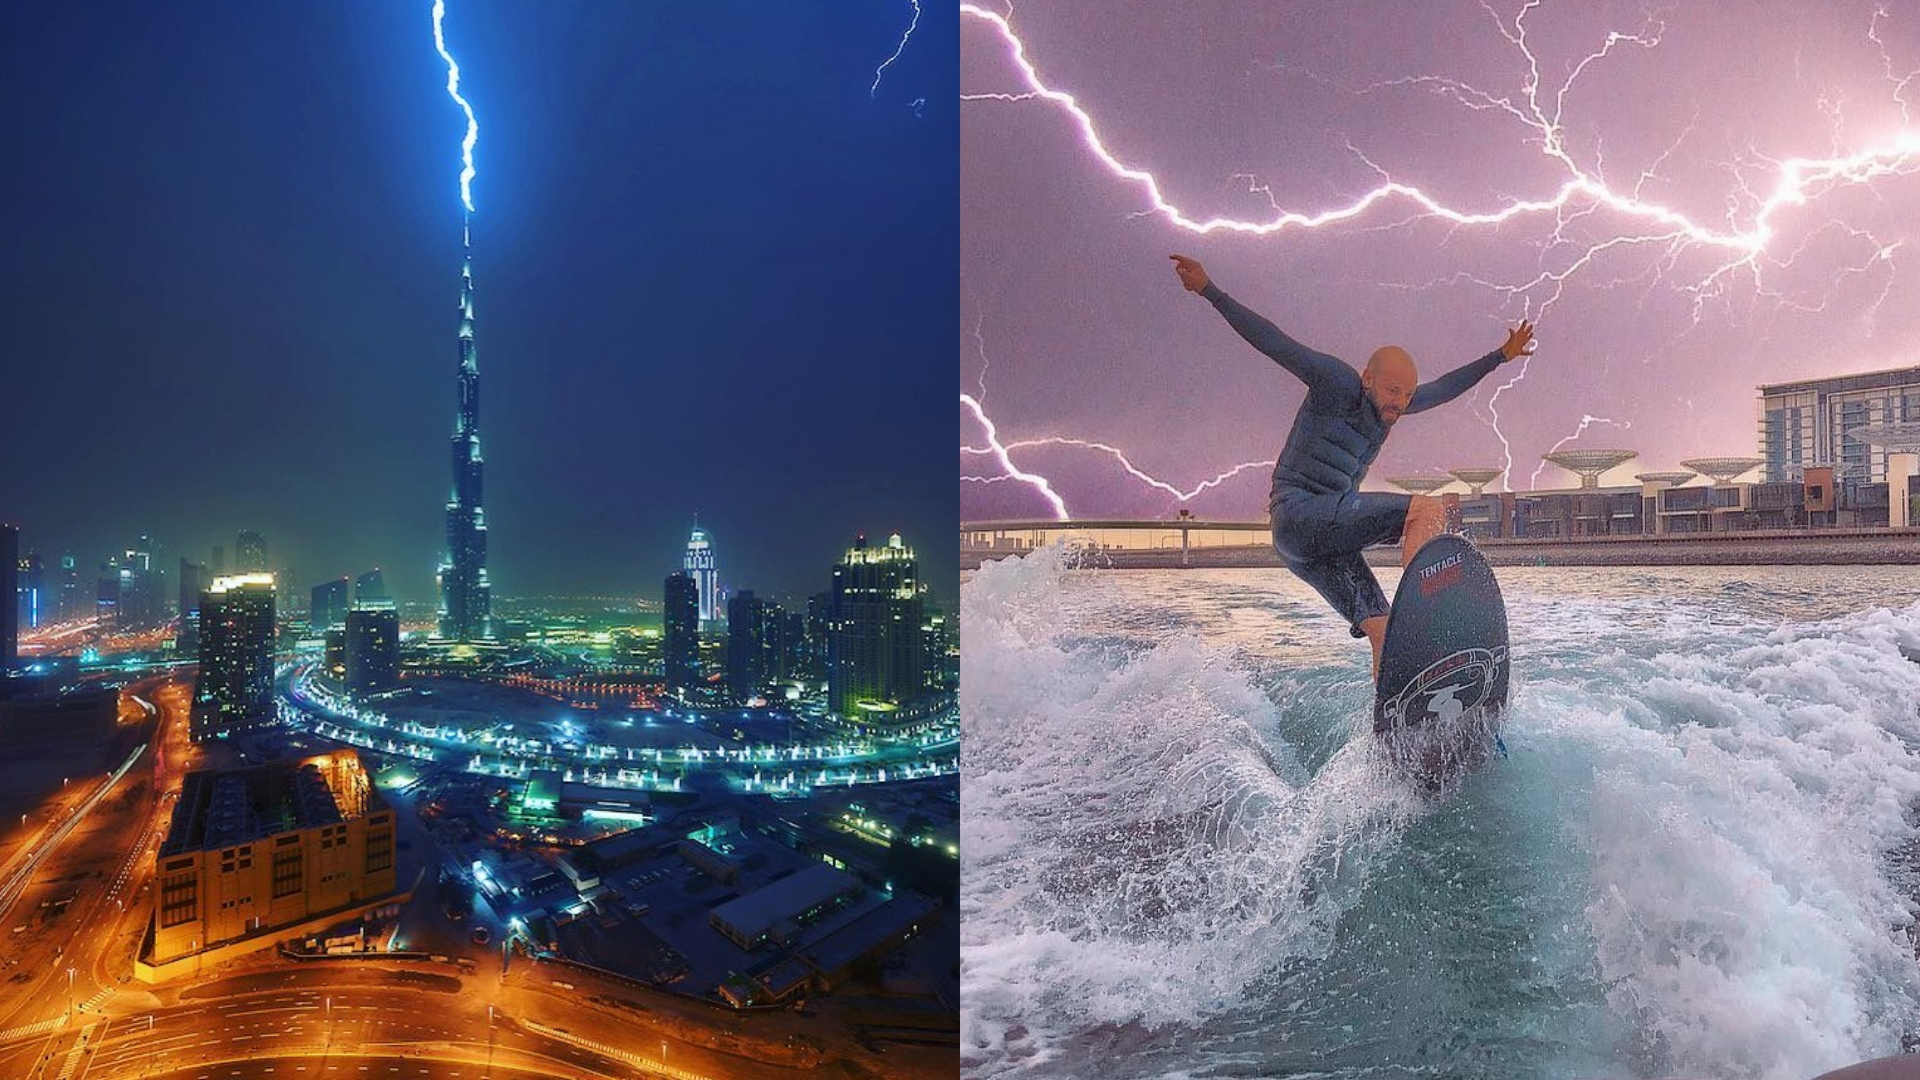 7 Epic Photos That Prove Nowhere Does A Lightning Storm Like The UAE